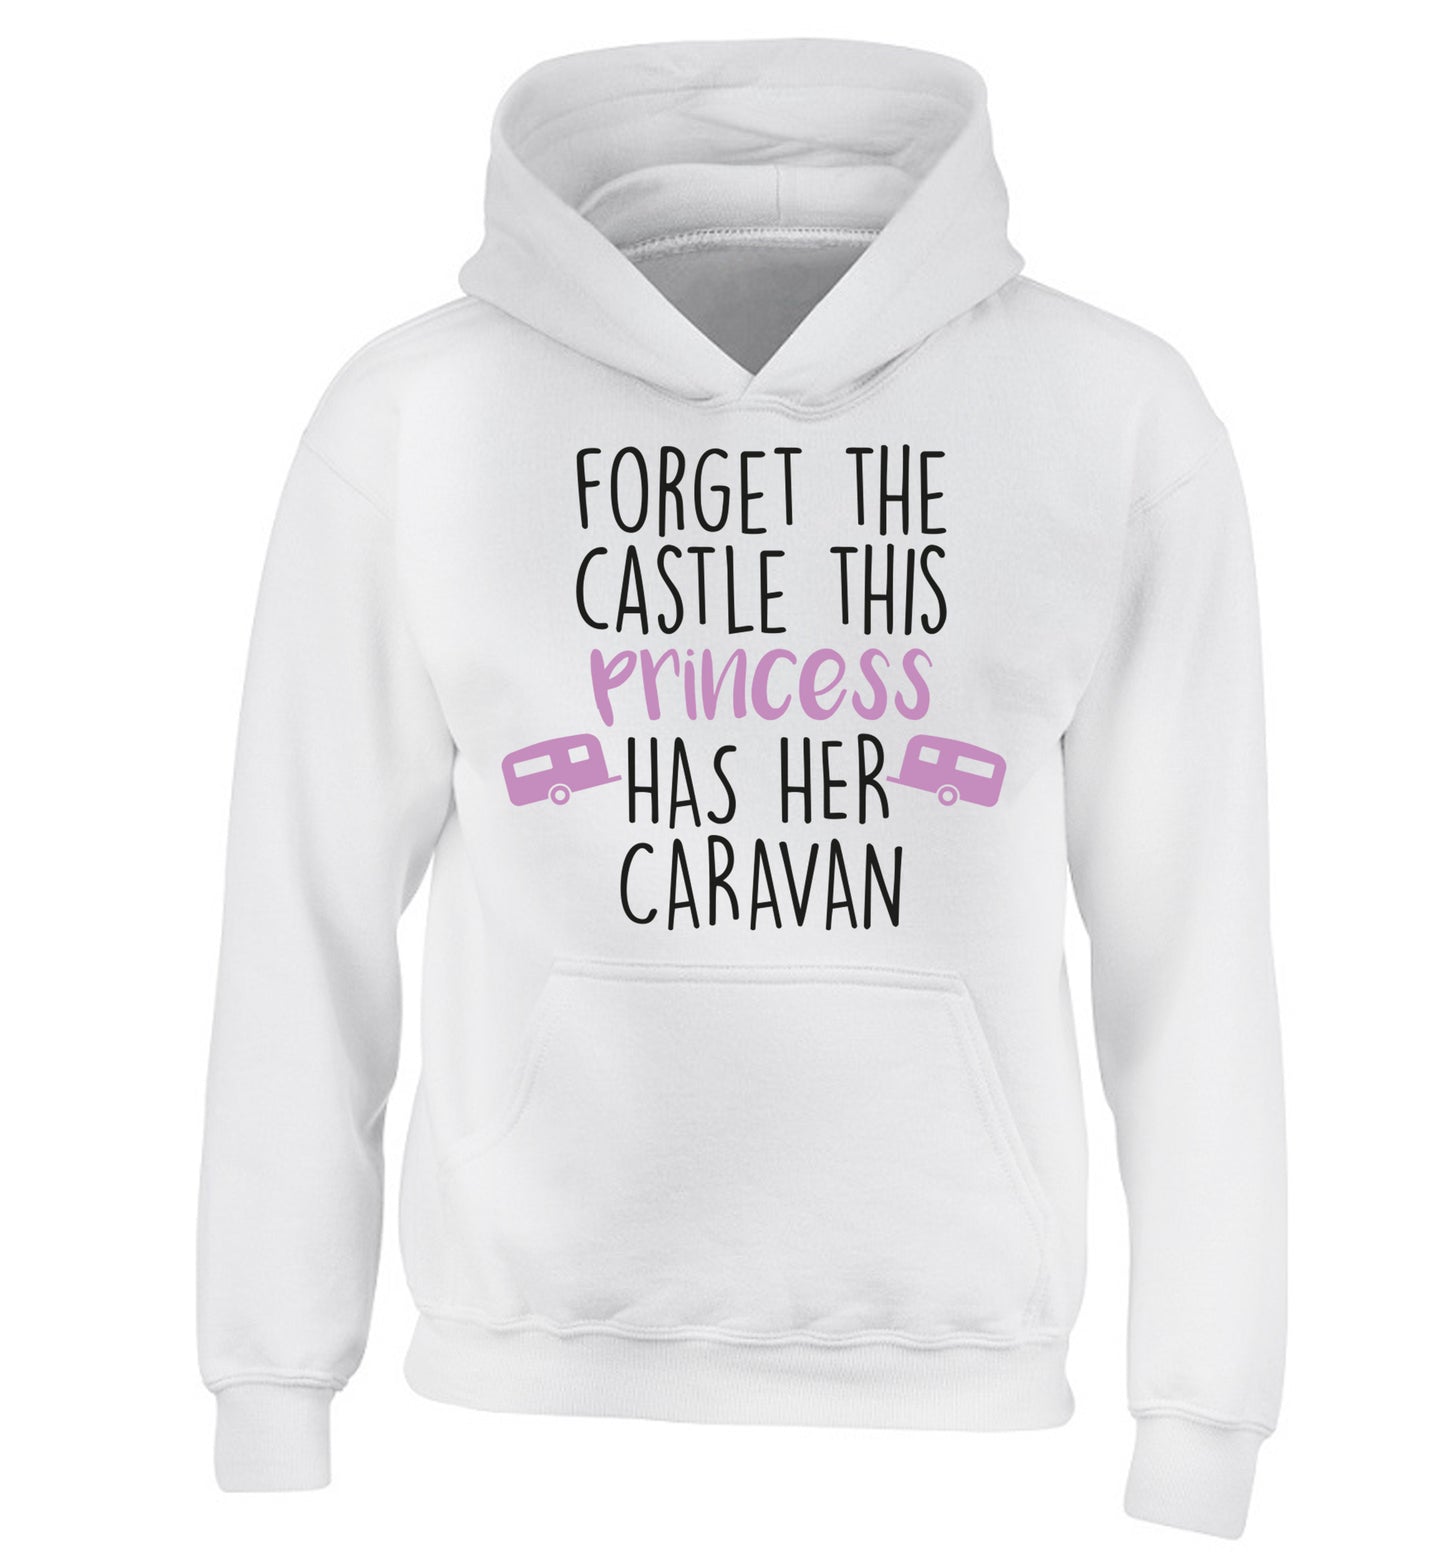 Forget the castle this princess lives at the caravan children's white hoodie 12-14 Years